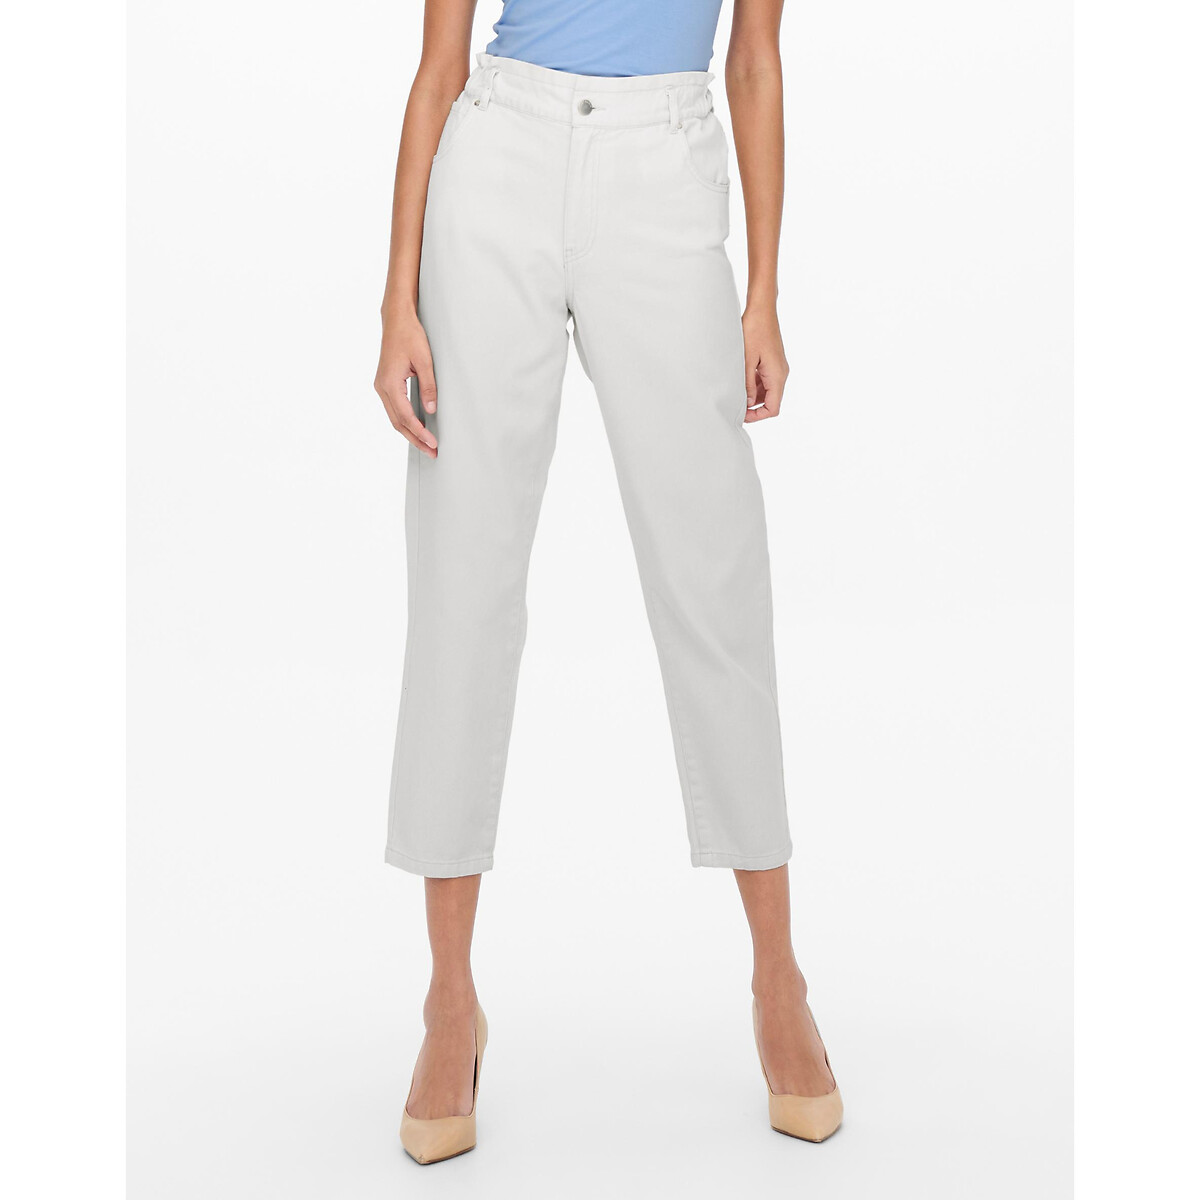 Cropped high waist jeans, white, Jdy | La Redoute